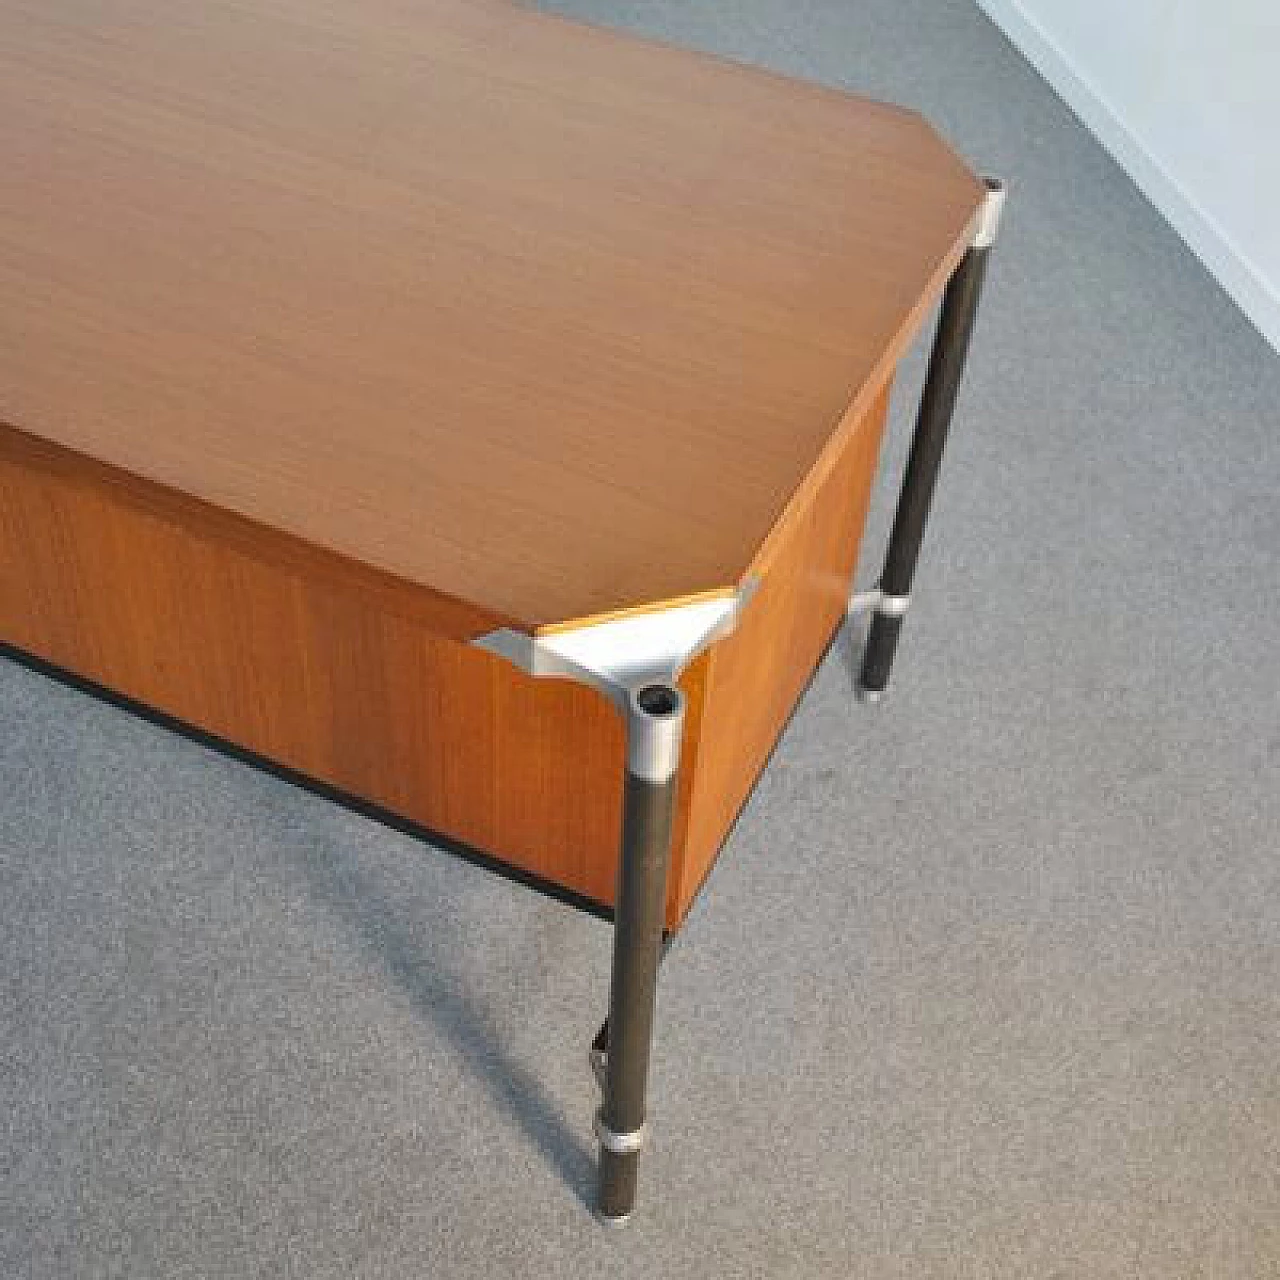 Executive desk by Ico Parisi for MIM Rome, 1950s 1452503